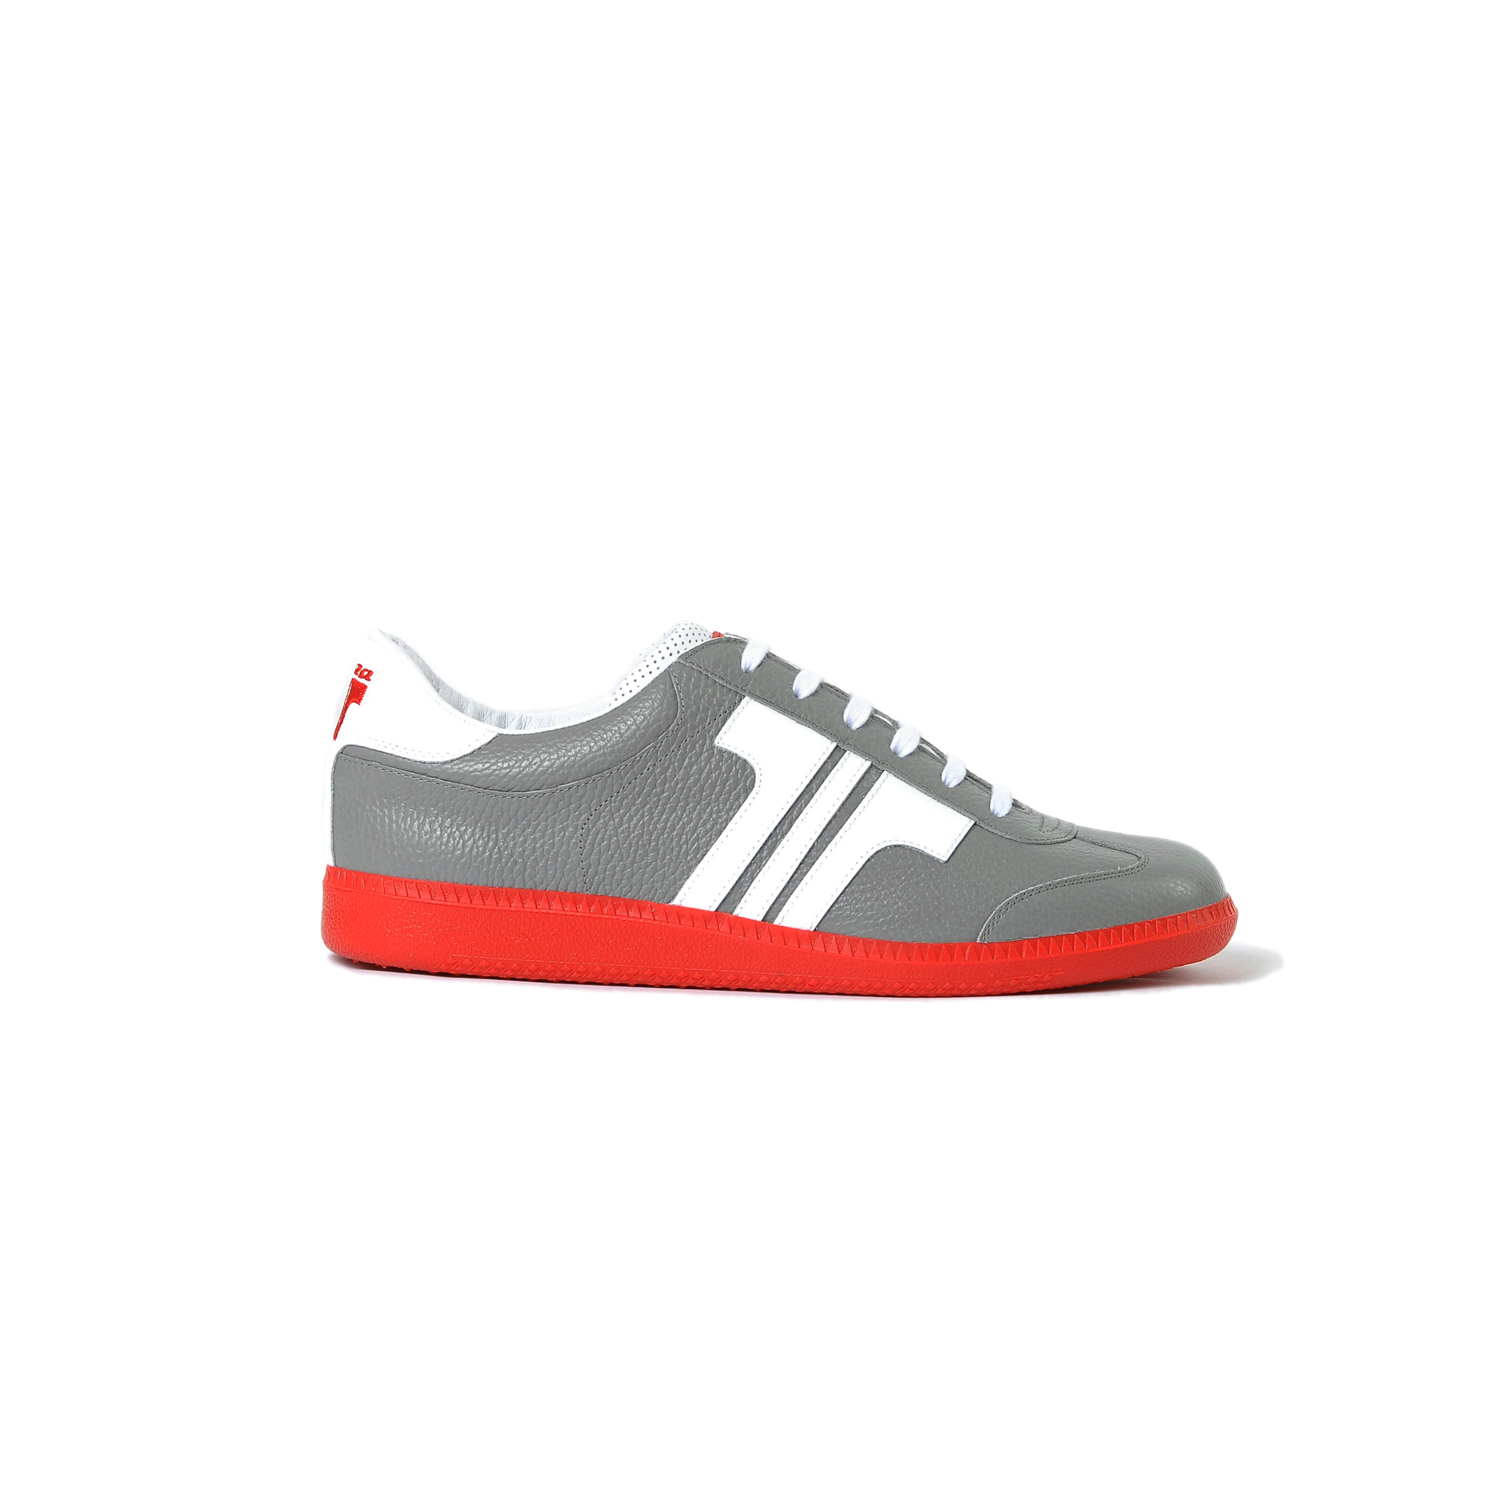 Tisza shoes - Compakt - Grey-white-red